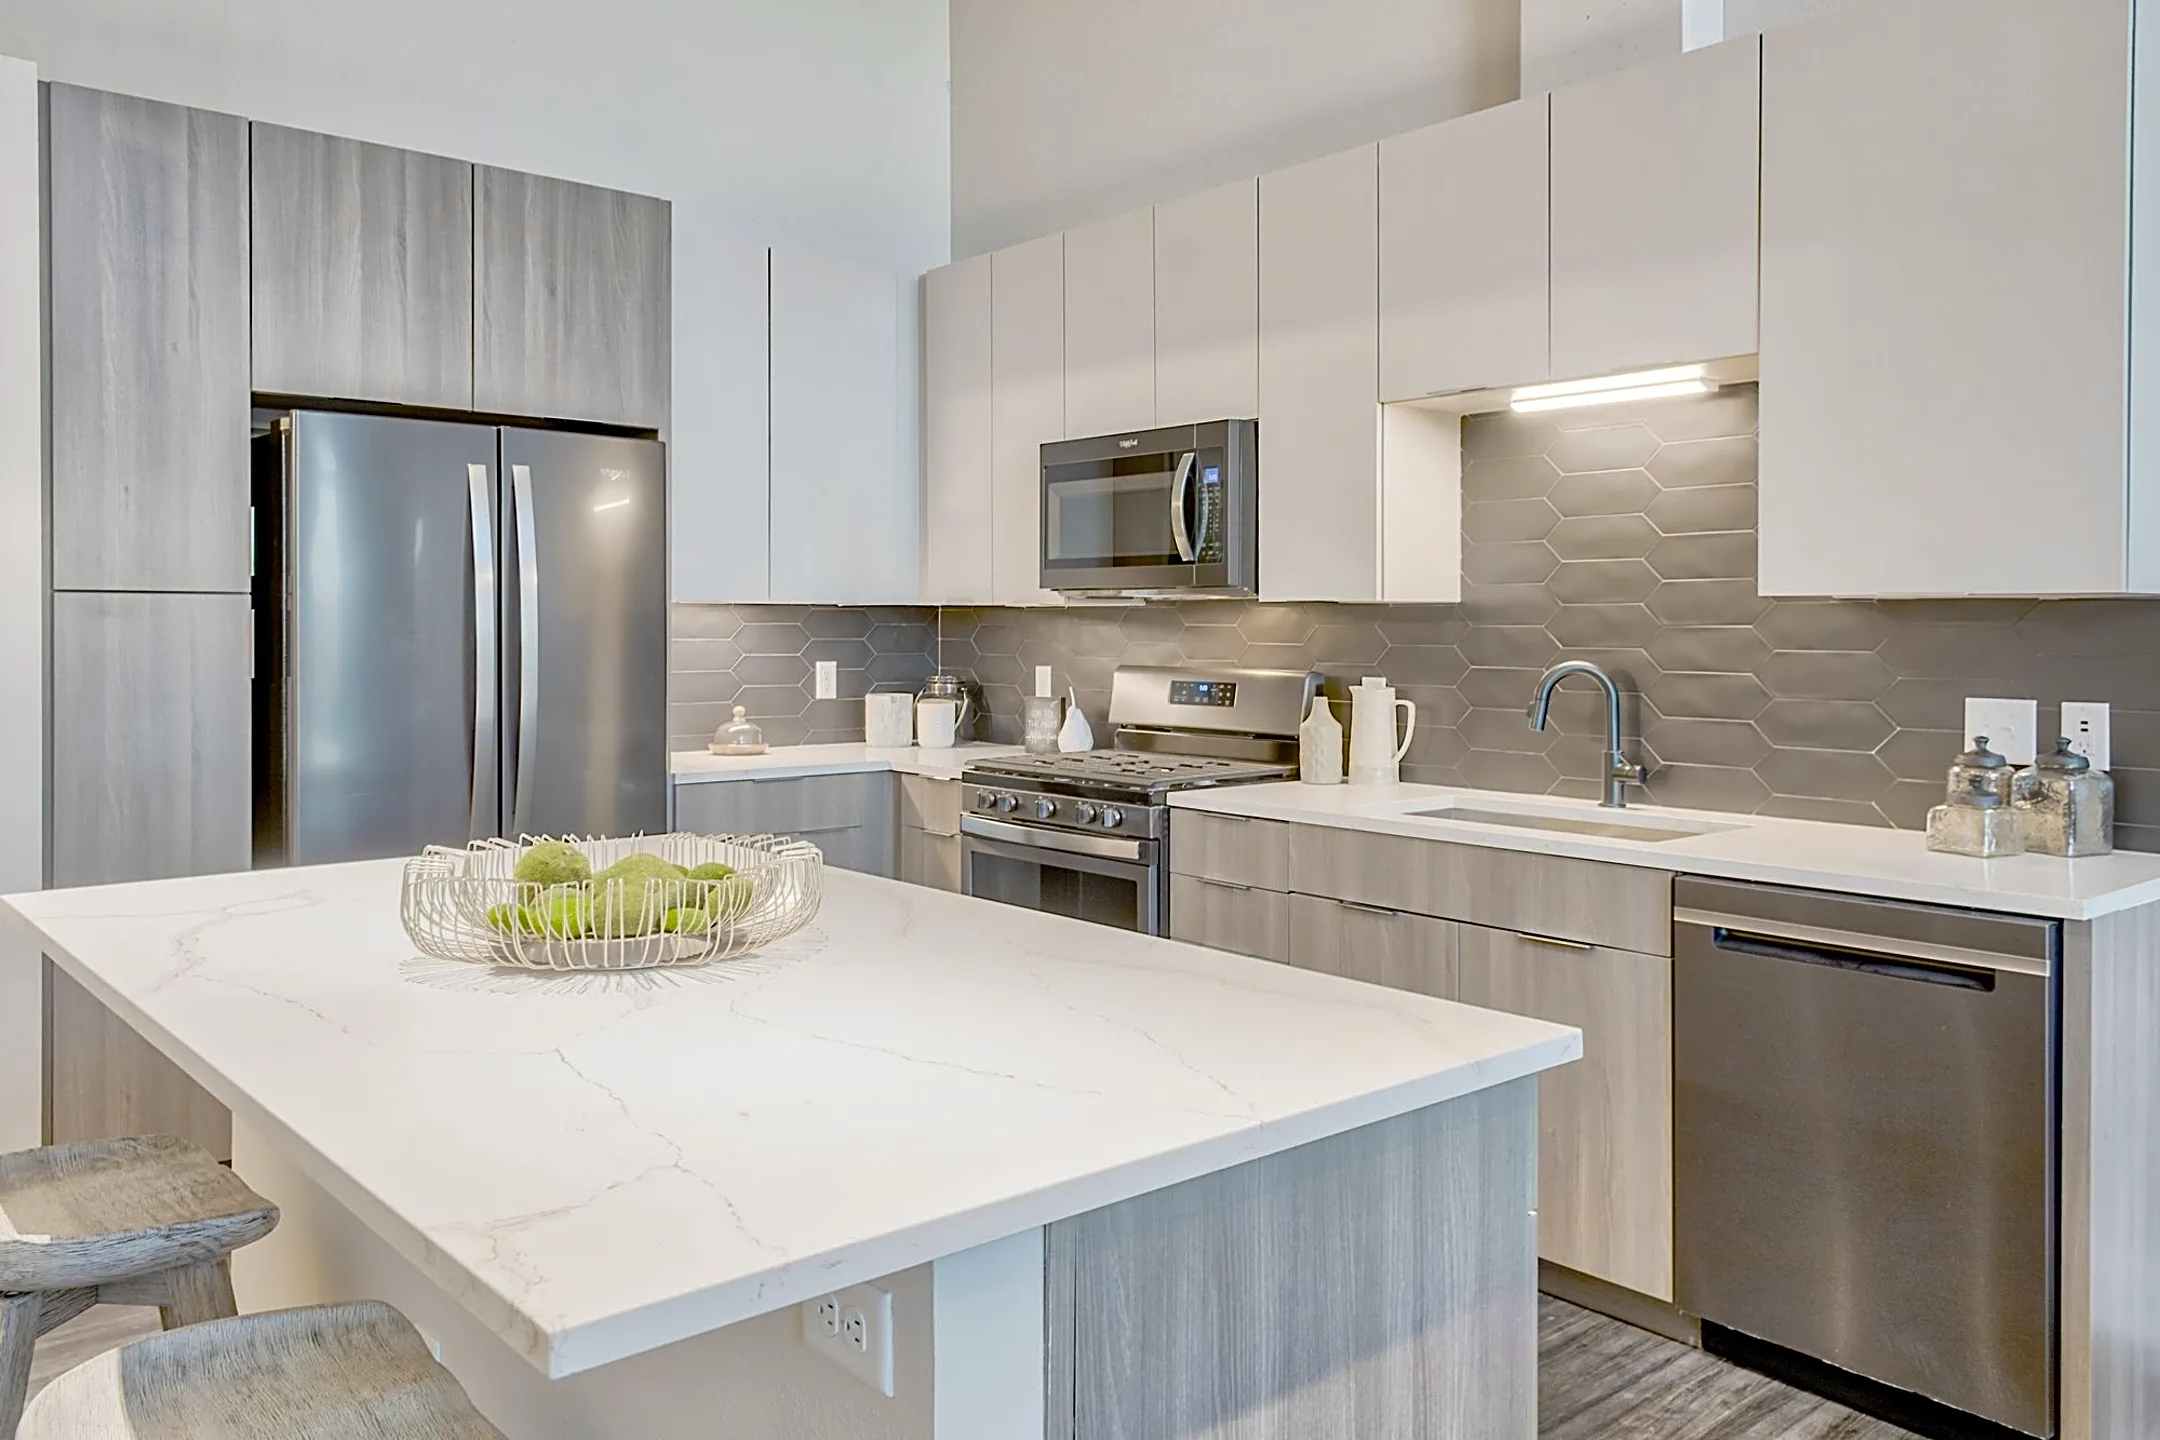 Kitchen - Ascent Apartments - Westminster, CO